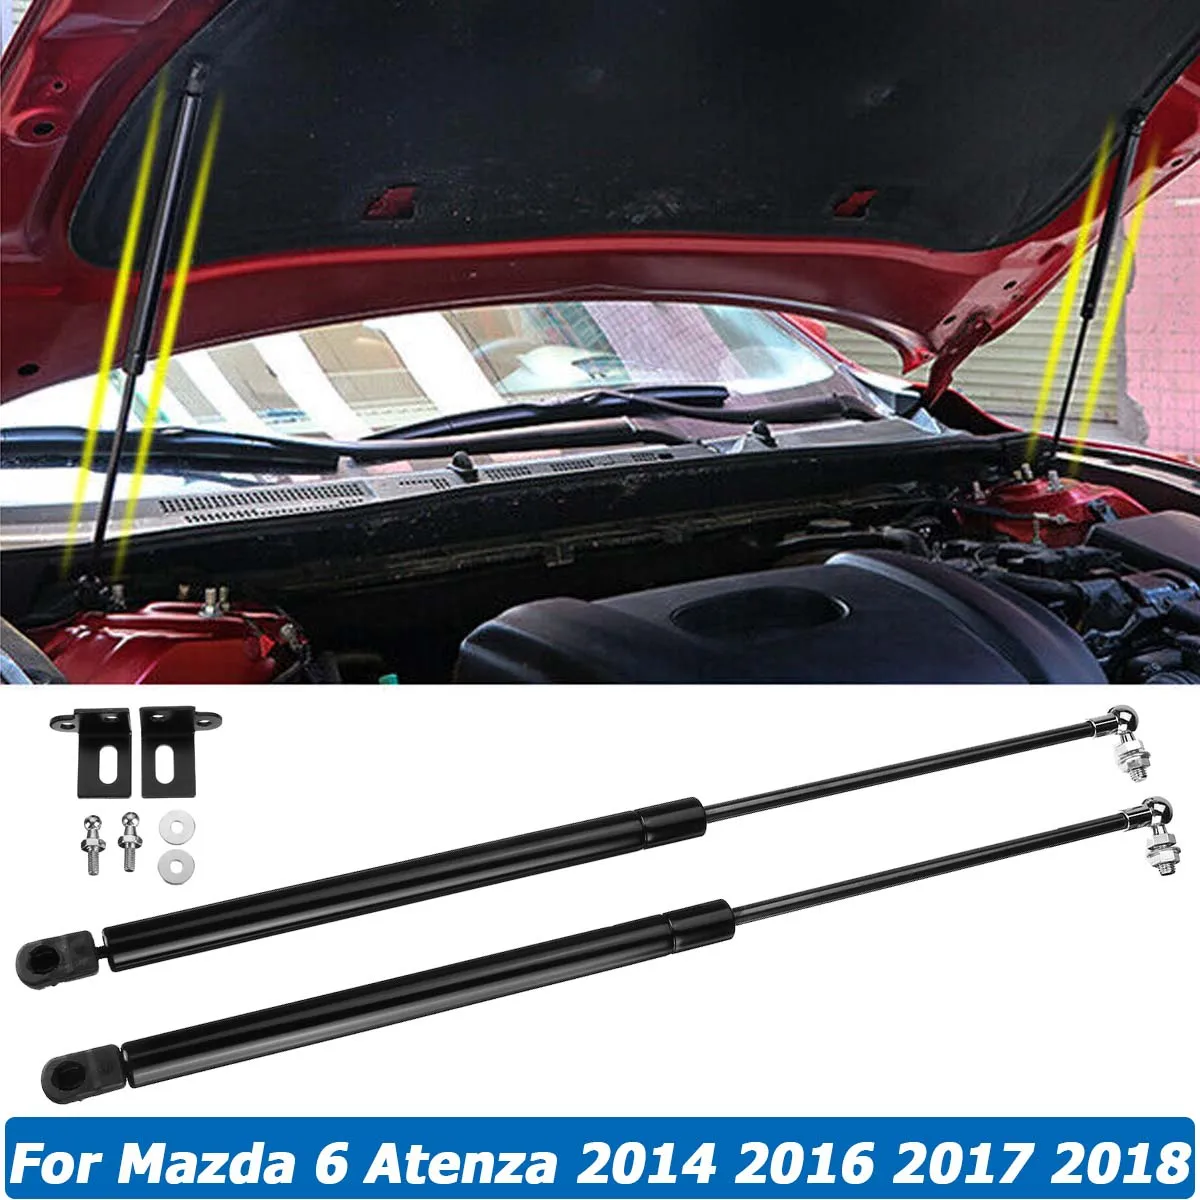 

For Mazda 6 Atenza 2014 2016 2017 2018 Front Engine Cover Hood Shock Lift Struts Bar Support Arm Rod Hydraulic Gas Spring